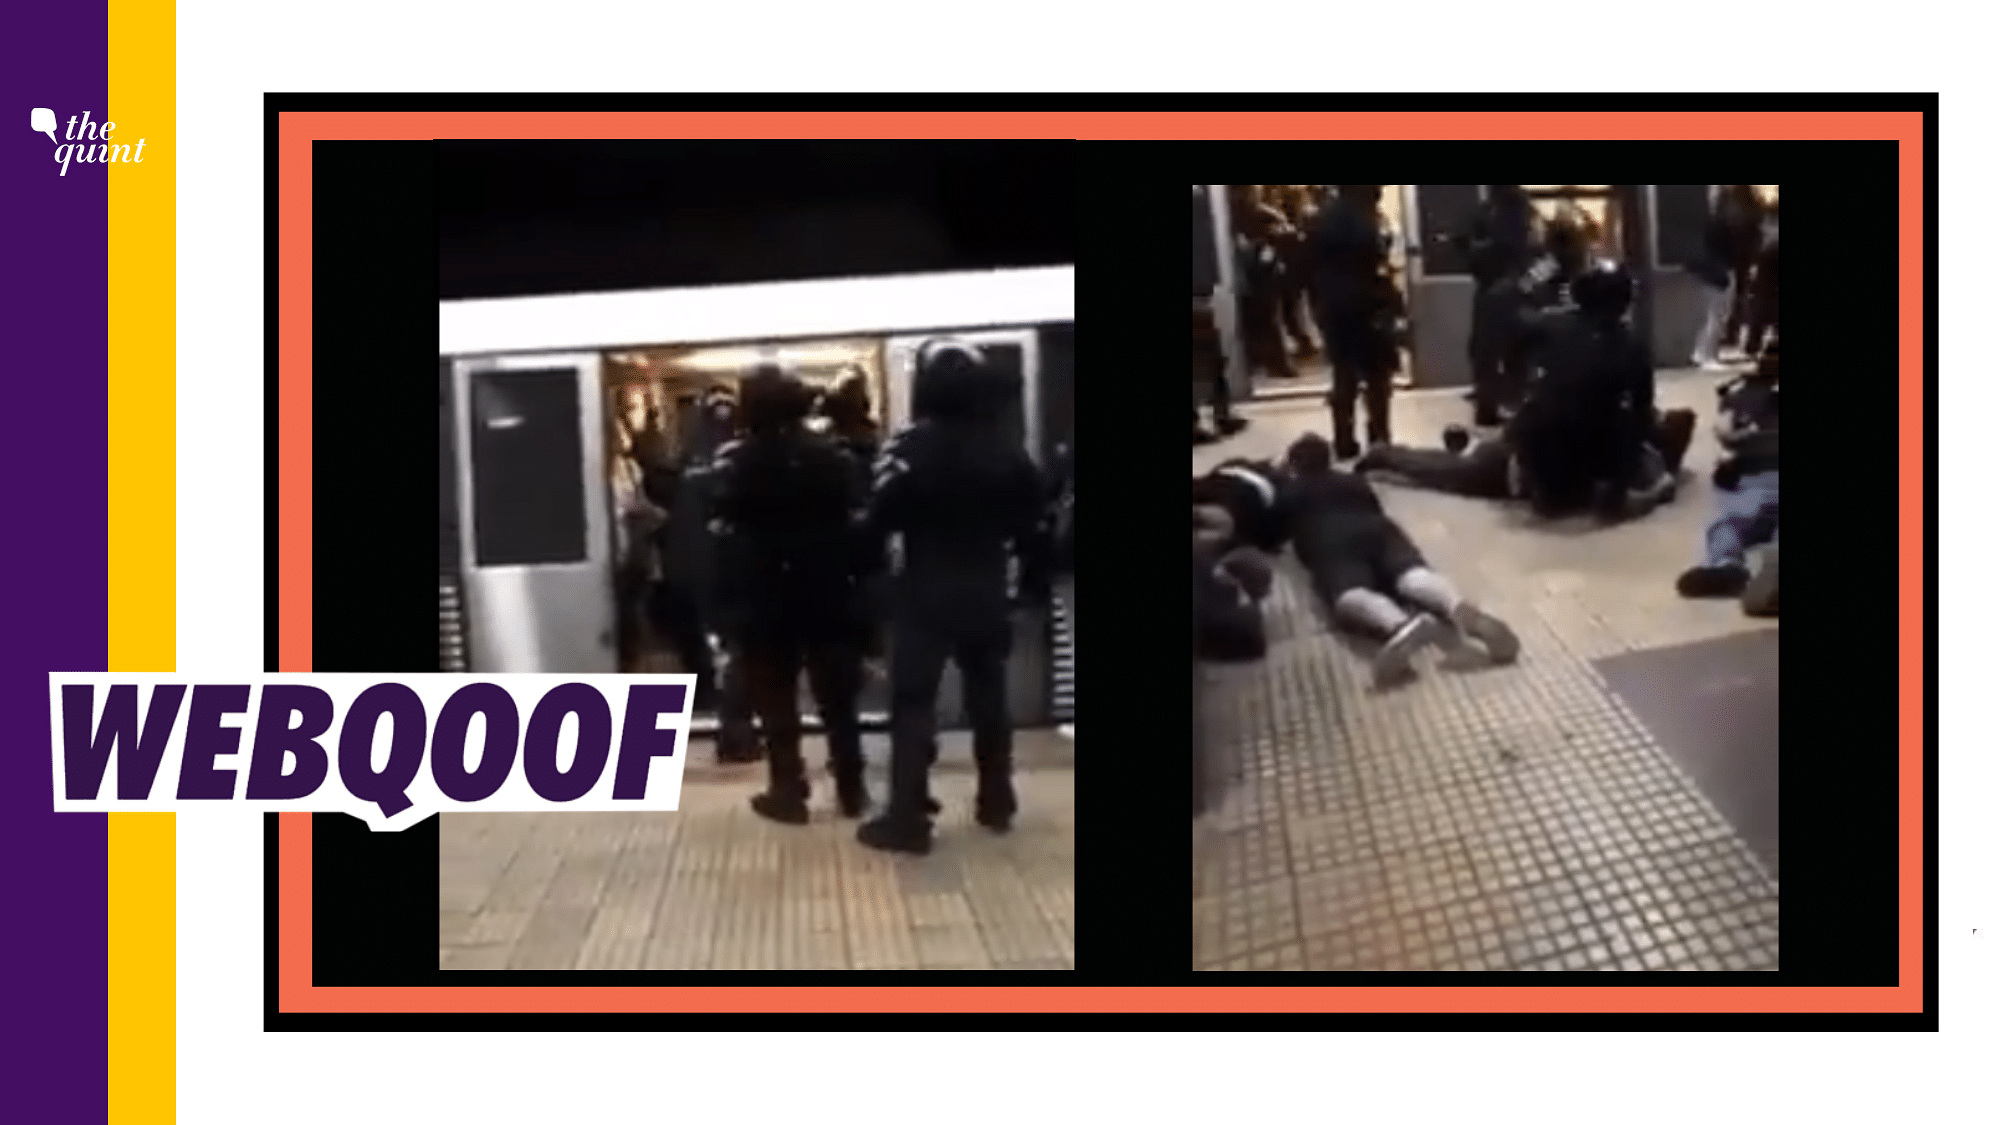 A video from Romania was shared with a false claim that French police arrested Muslims in a Paris metro for not wearing masks and spitting on passengers.